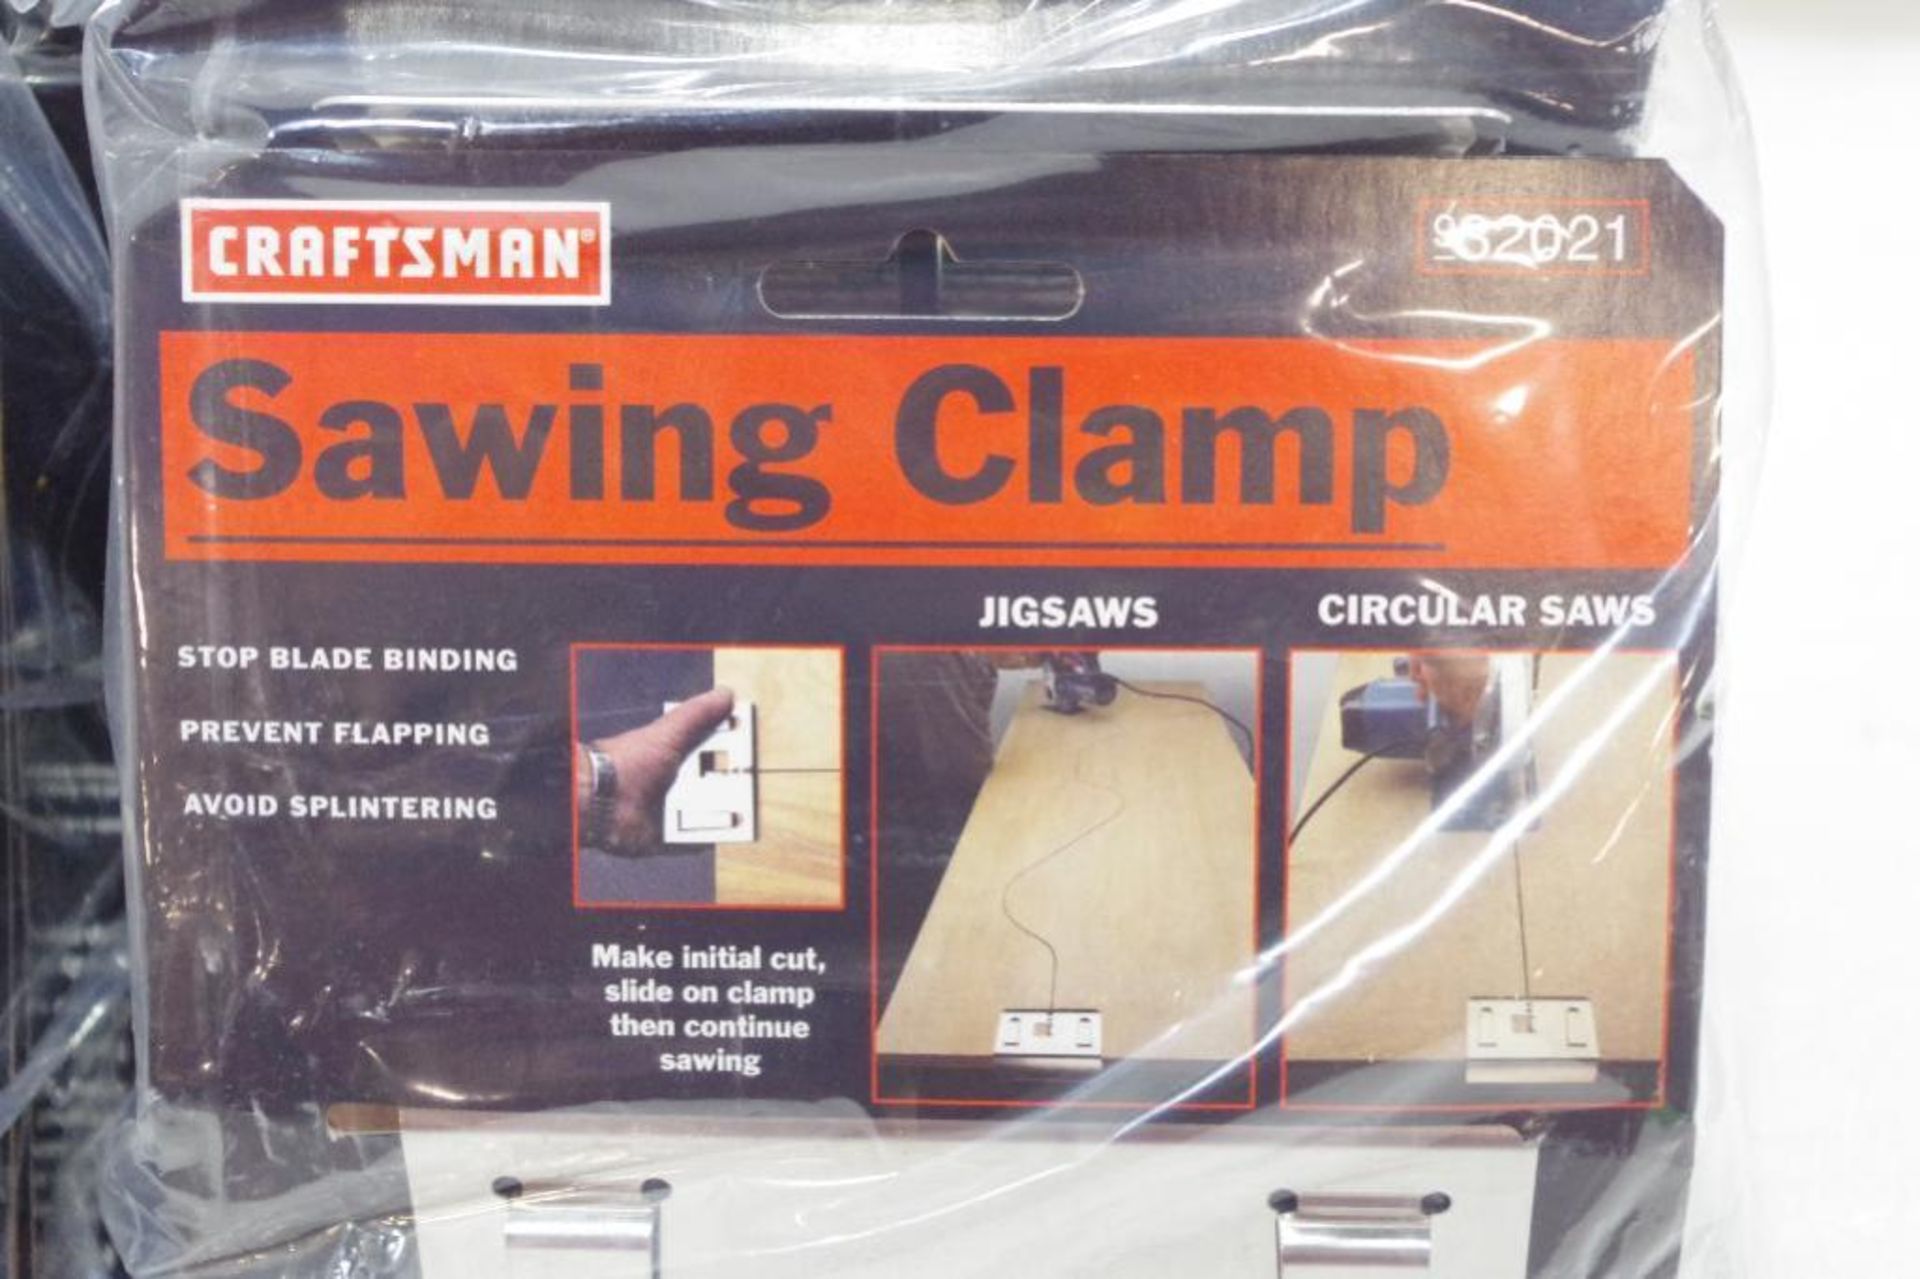 [10] NEW CRAFTSMAN Sawing Clamps (1 Box of 10) - Image 2 of 4